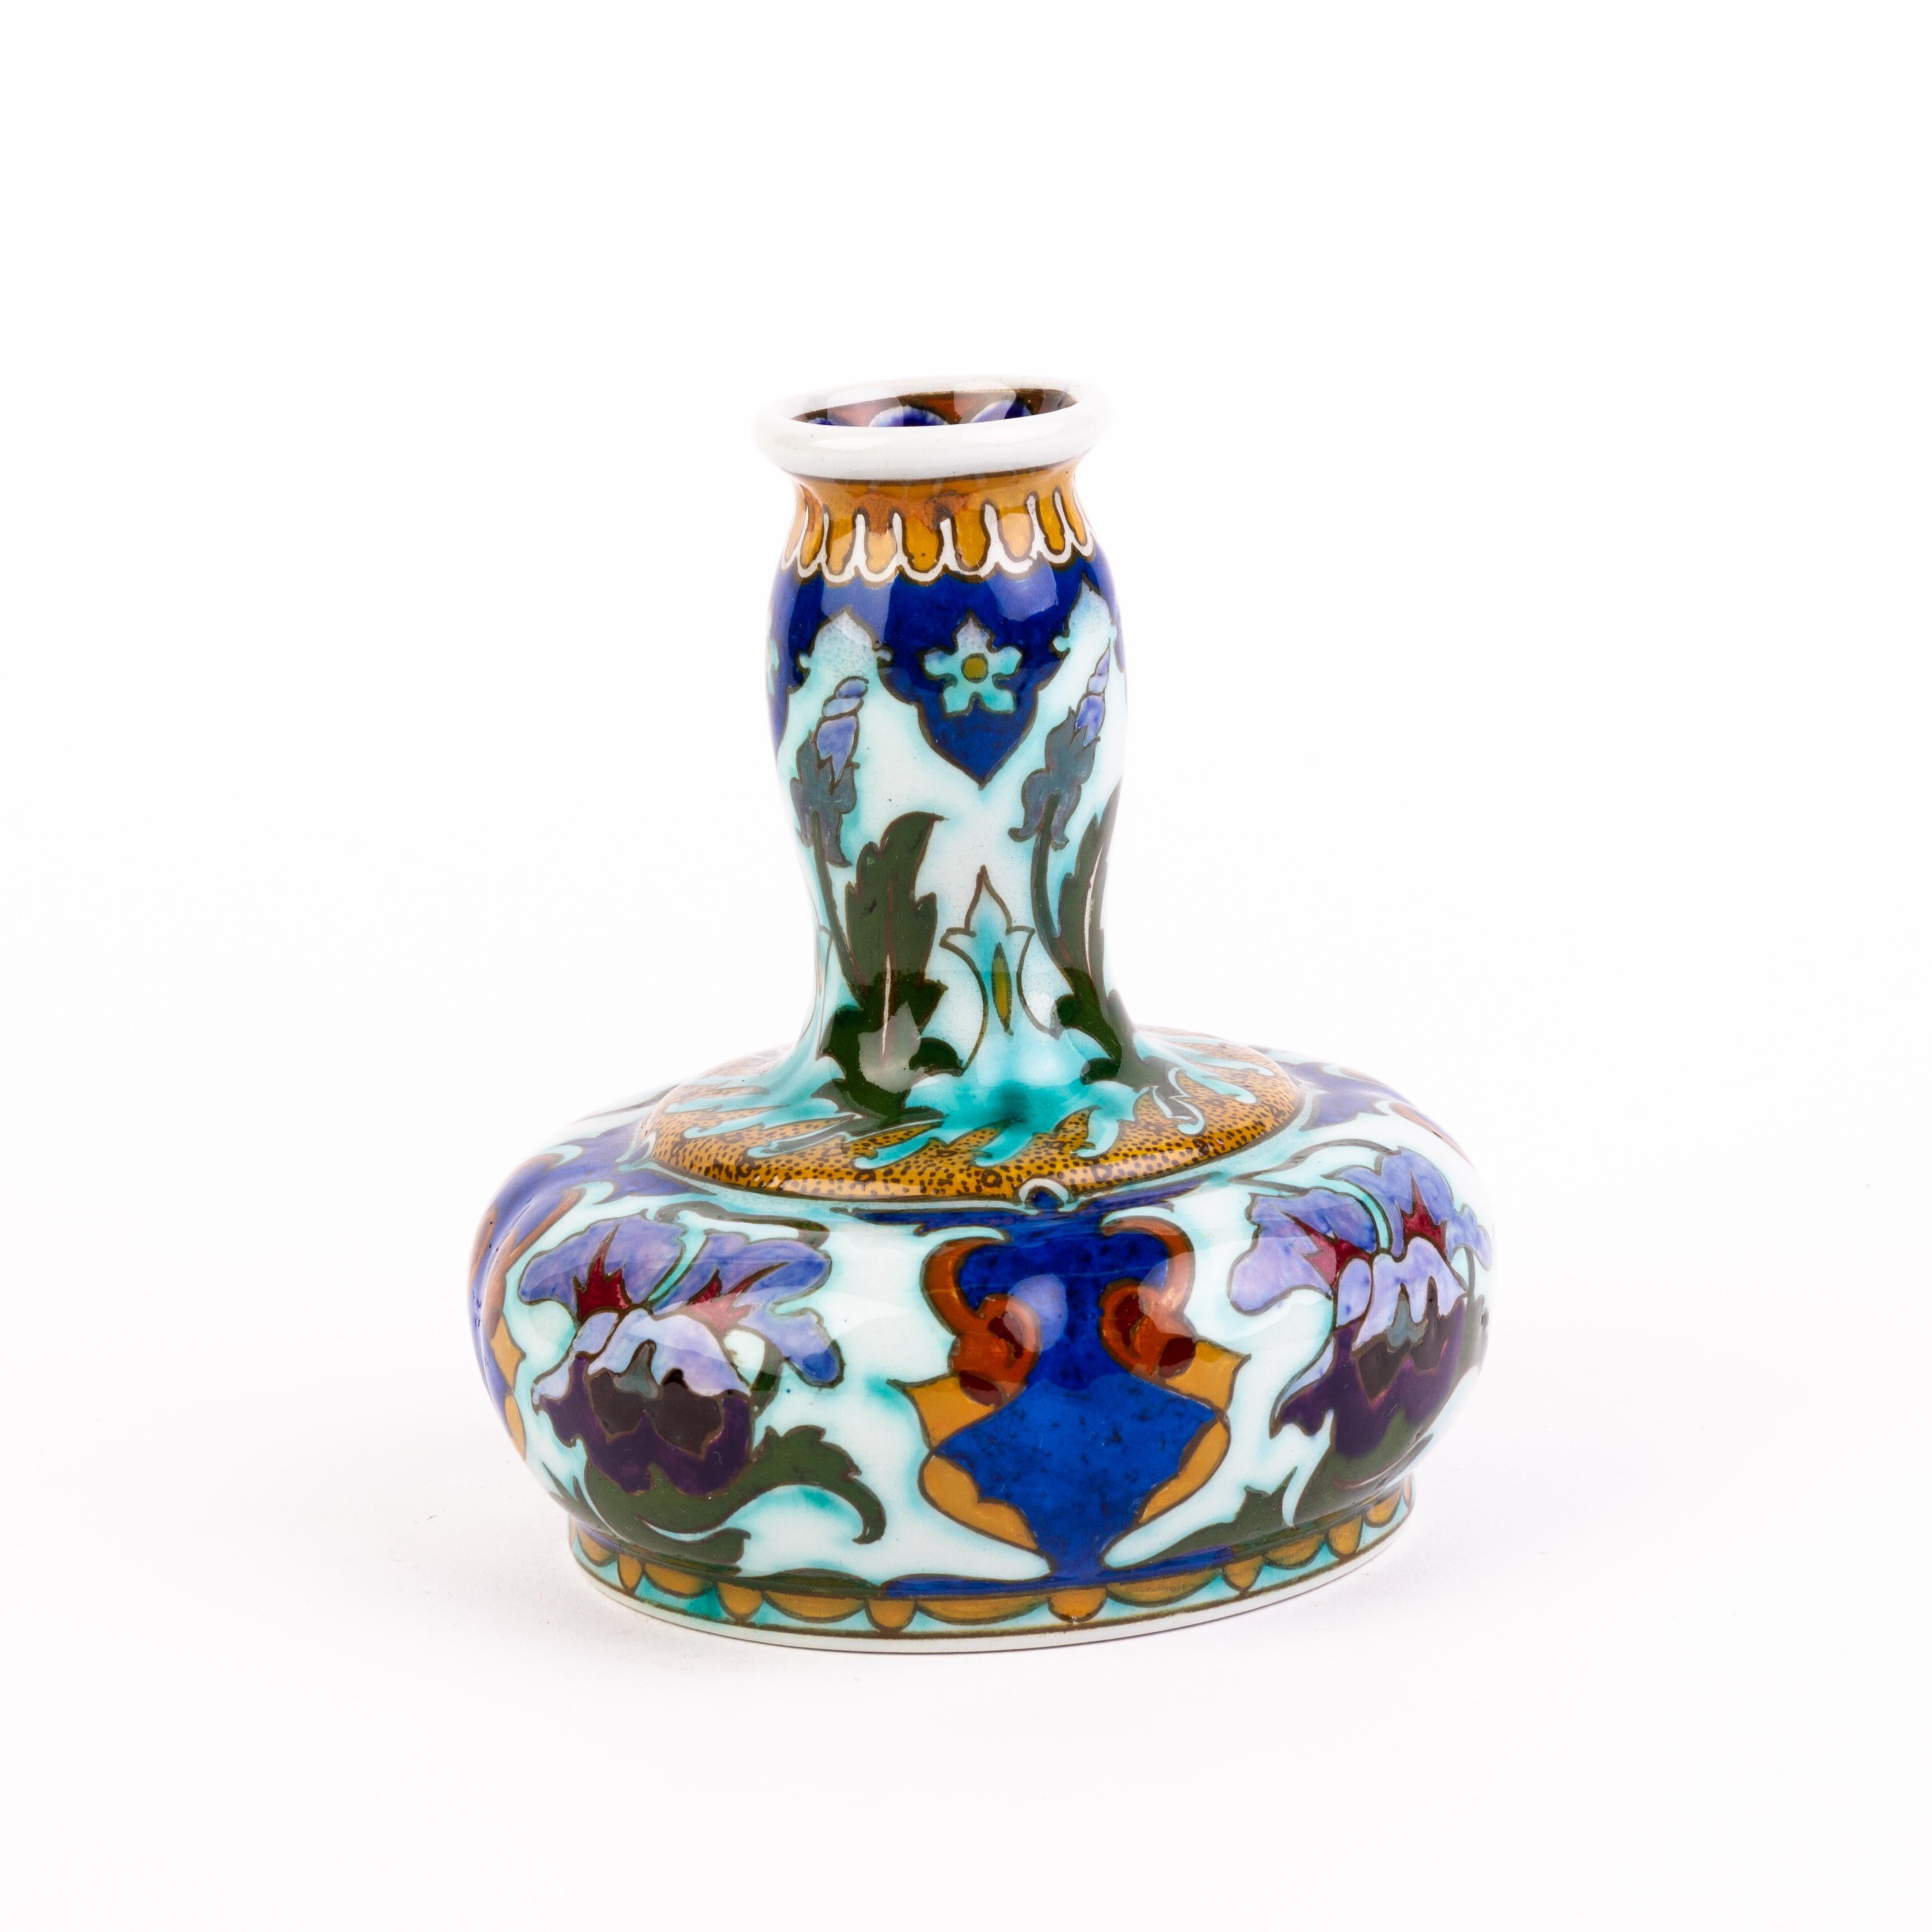 Rare Rozenburg Art Pottery Vase
Good condition 
From a private collection.
Free international shipping.